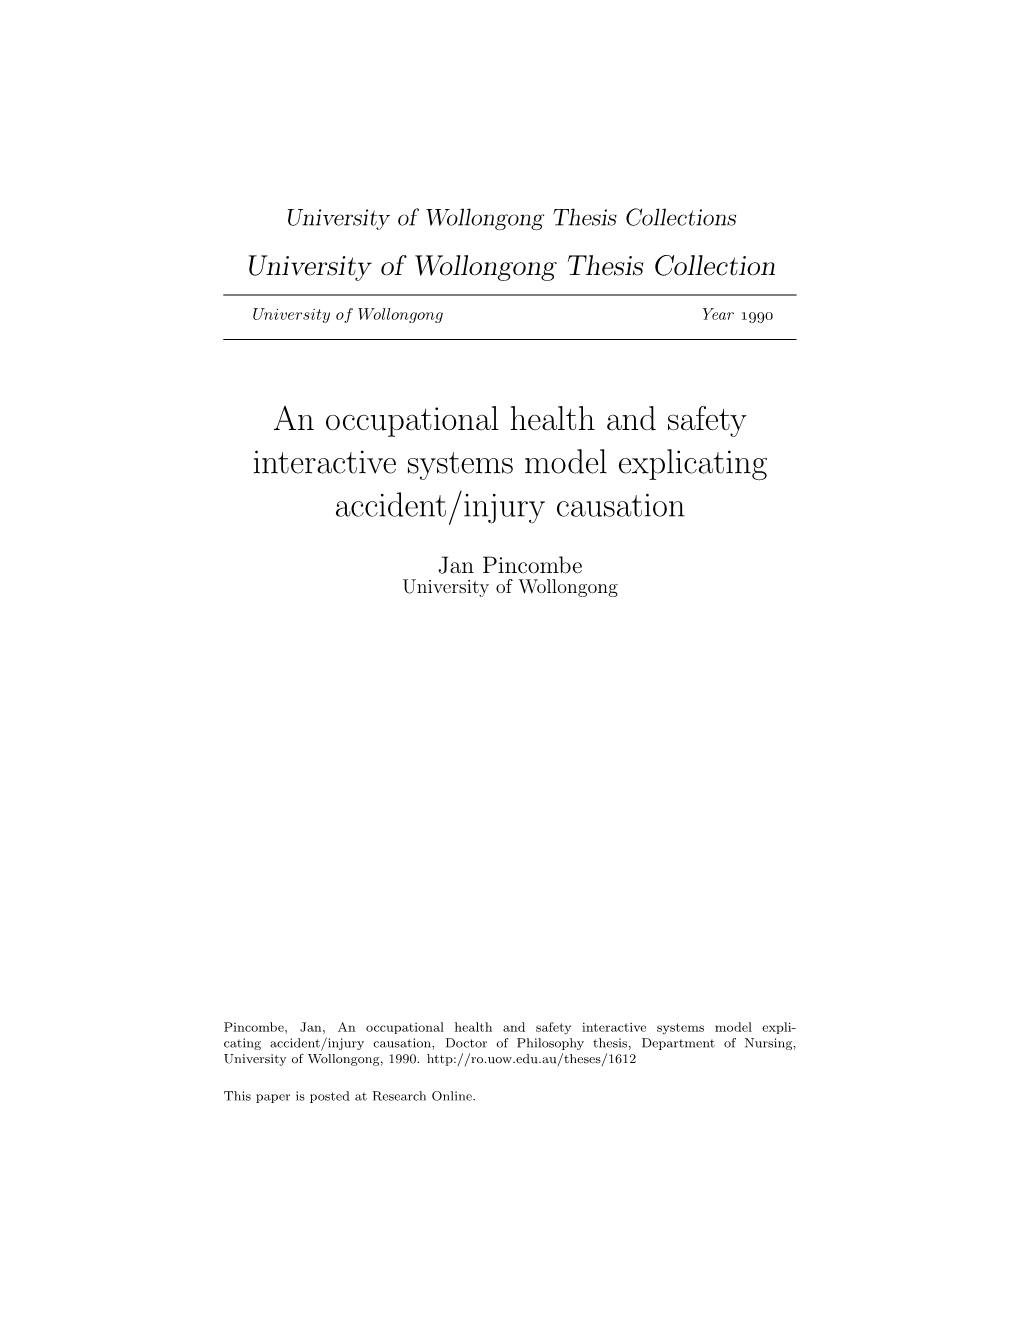 An Occupational Health and Safety Interactive Systems Model Explicating Accident/Injury Causation